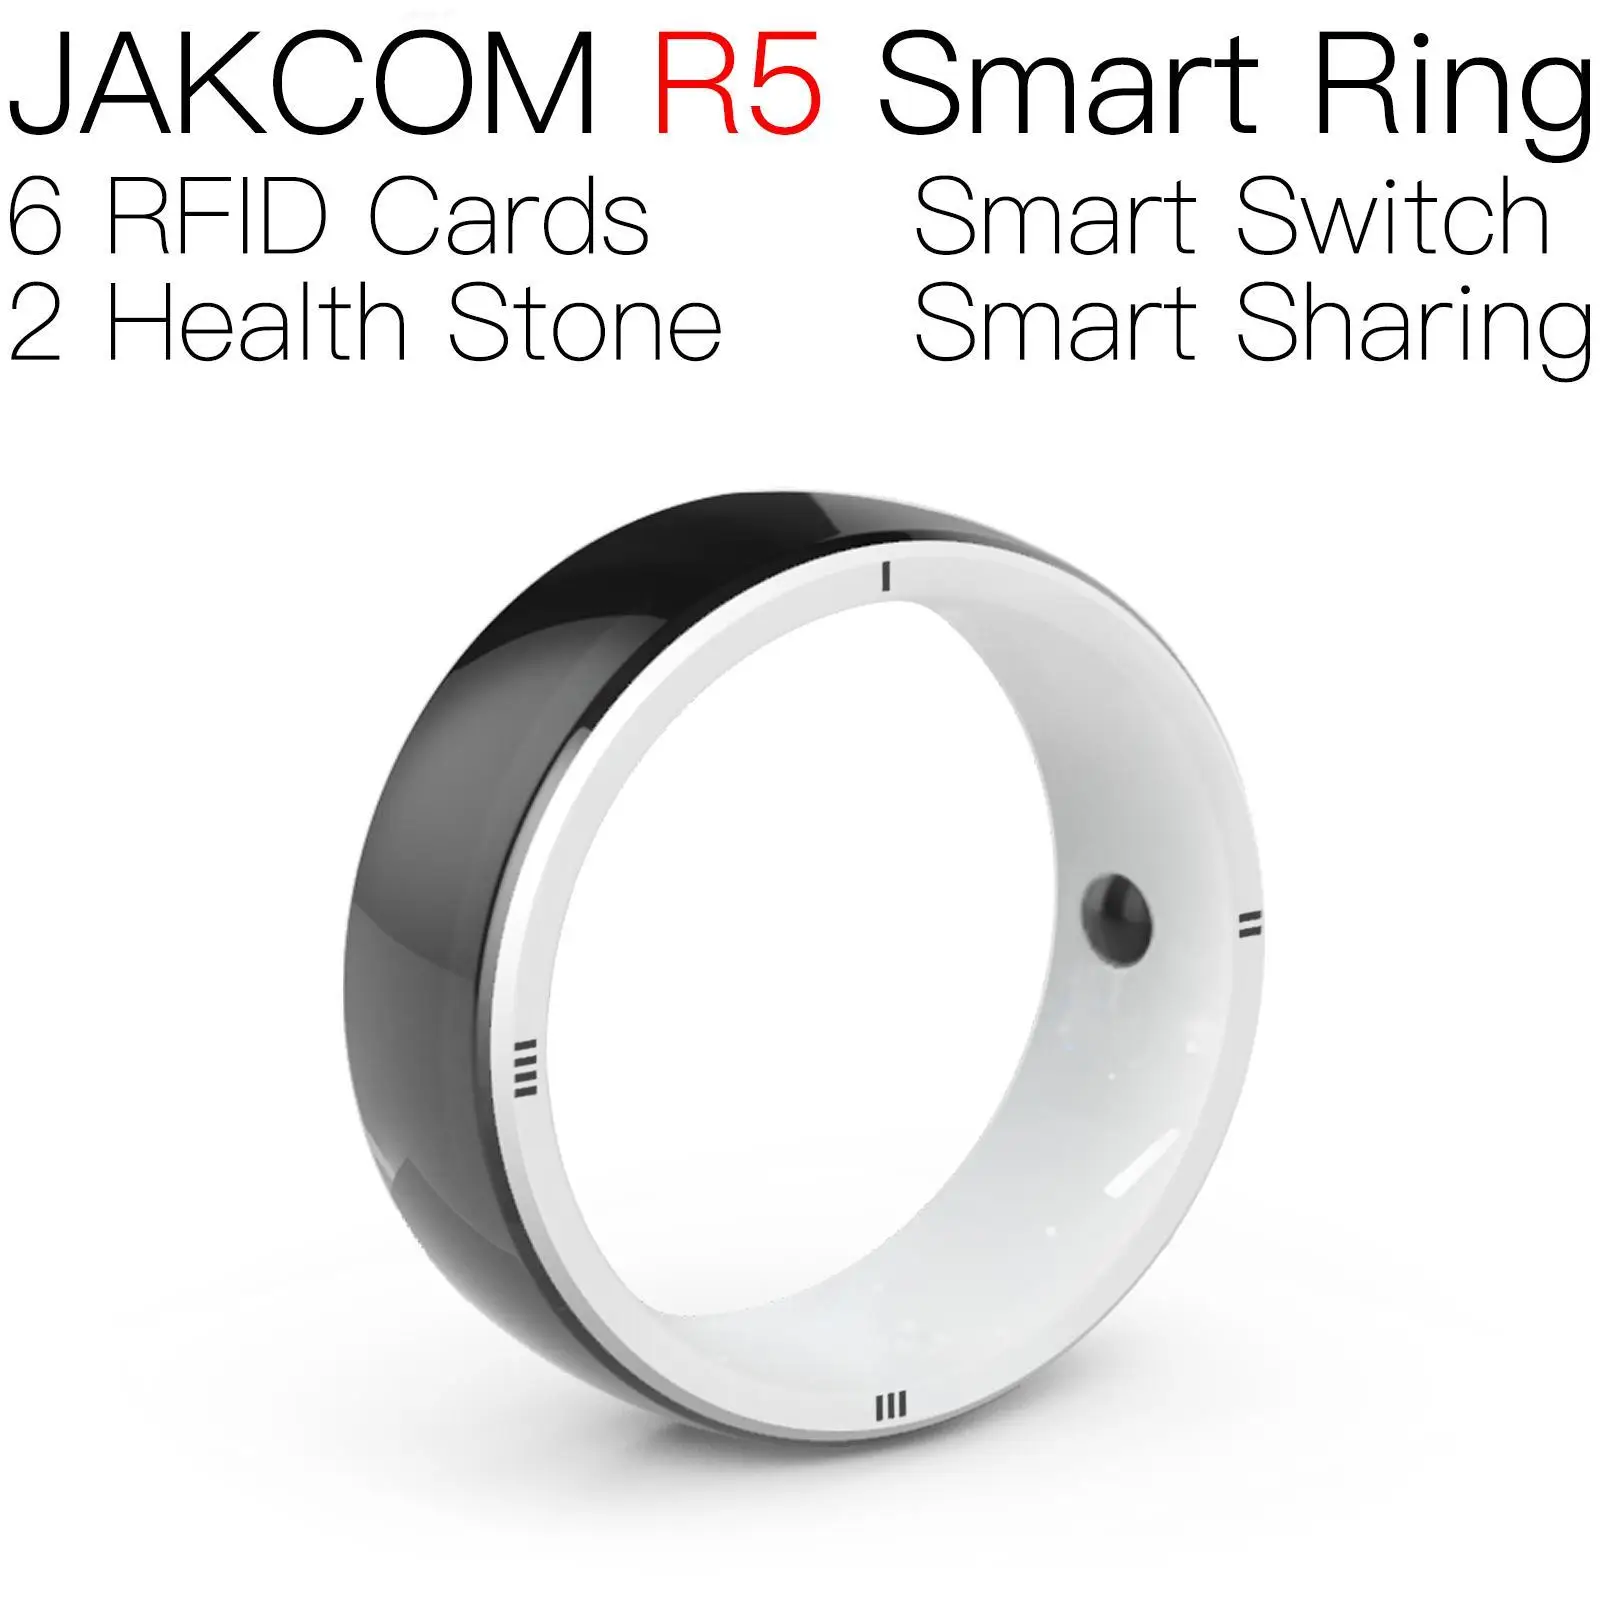 

JAKCOM R5 Smart Ring Match to mylockme hair official store microchips animal bracelet rfid uid modifiable mochuarfid card